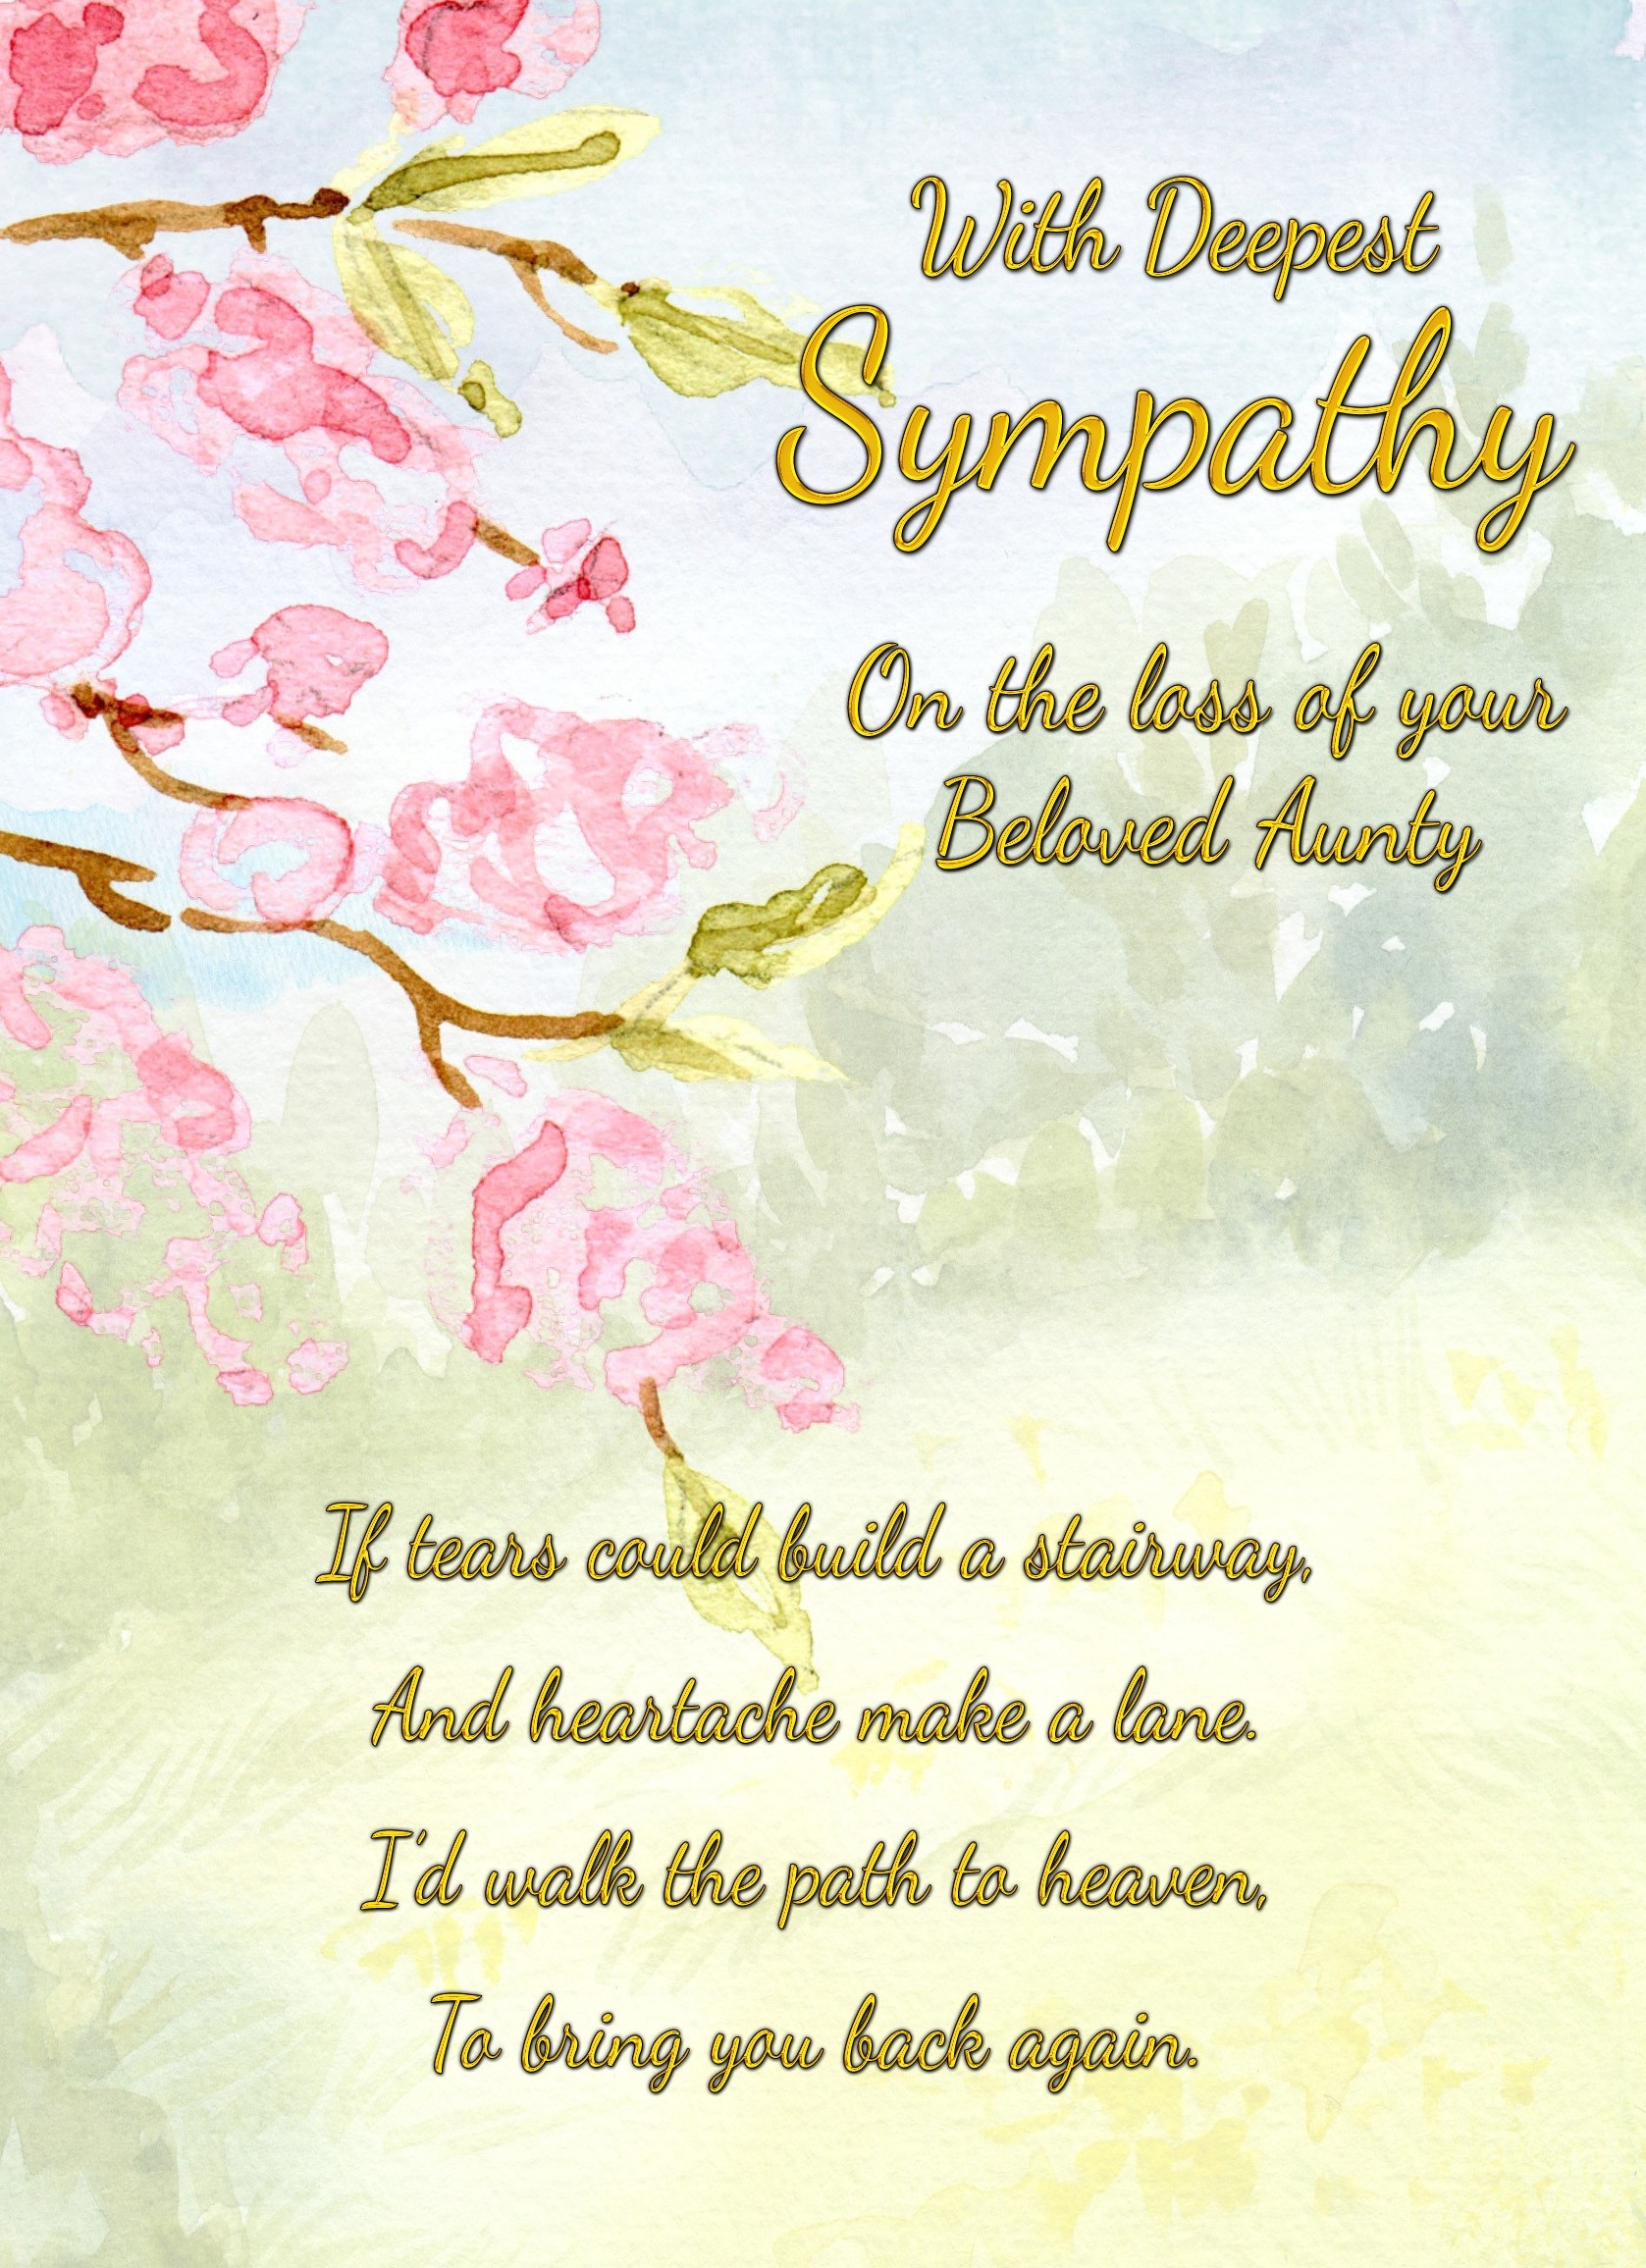 Sympathy Bereavement Card (With Deepest Sympathy, Beloved Aunty)